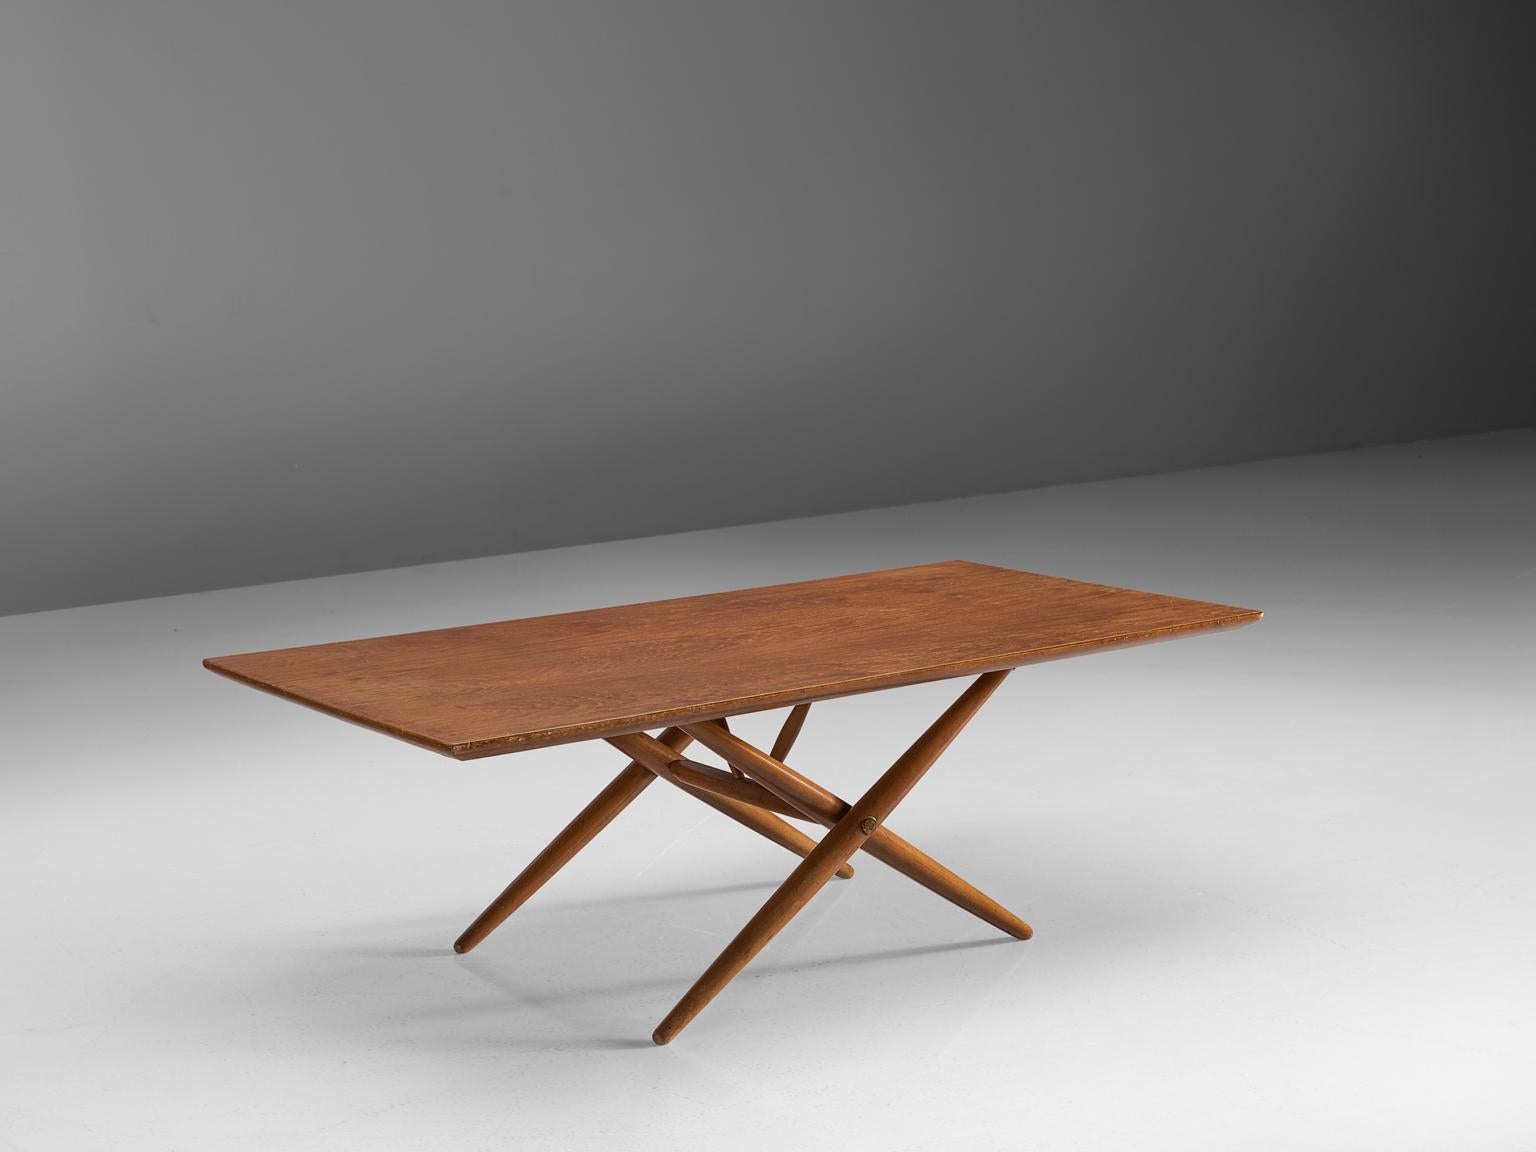 Ilmari Tapiovaara for Asko, 'Domino' coffee table, birch, Finland, 1953.

This Finnish coffee table is designed by Ilmari Tapiovaara. The table features a solid rectangular tabletop and a cross-legged base with legs that are tapered towards both